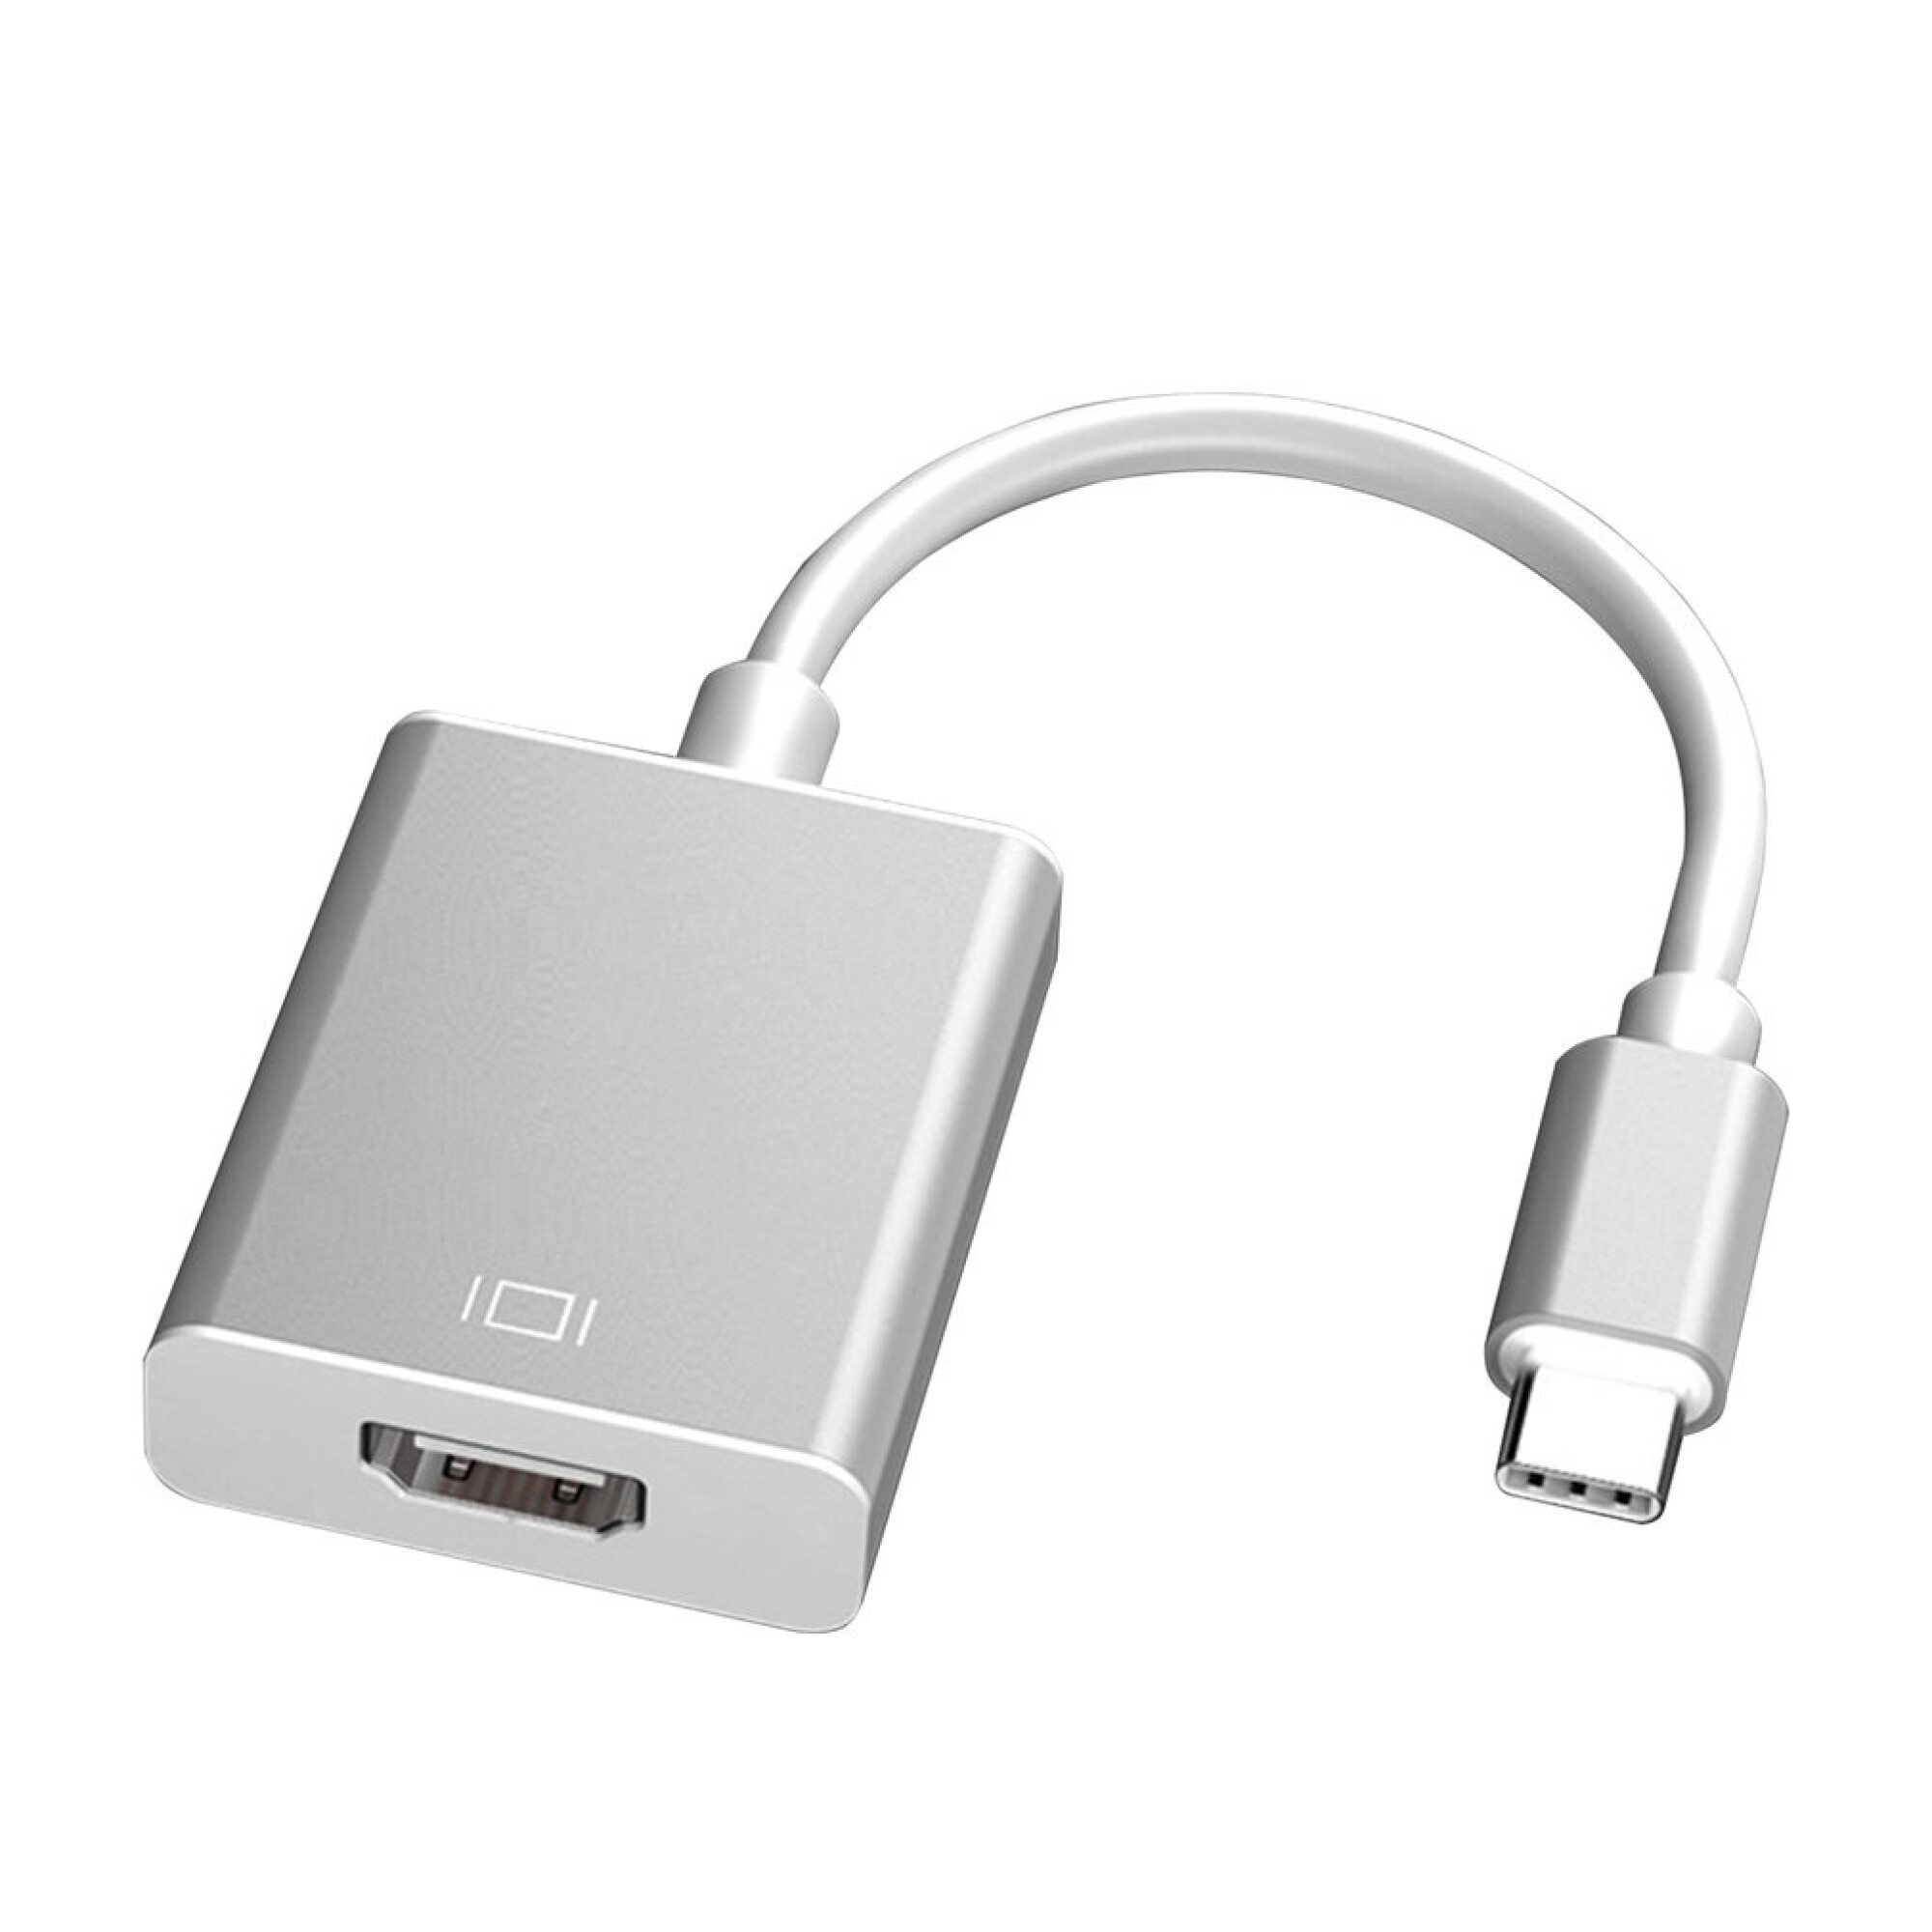 Cable Usb Hdmi Para Android / iPhone / Tipo C Celular